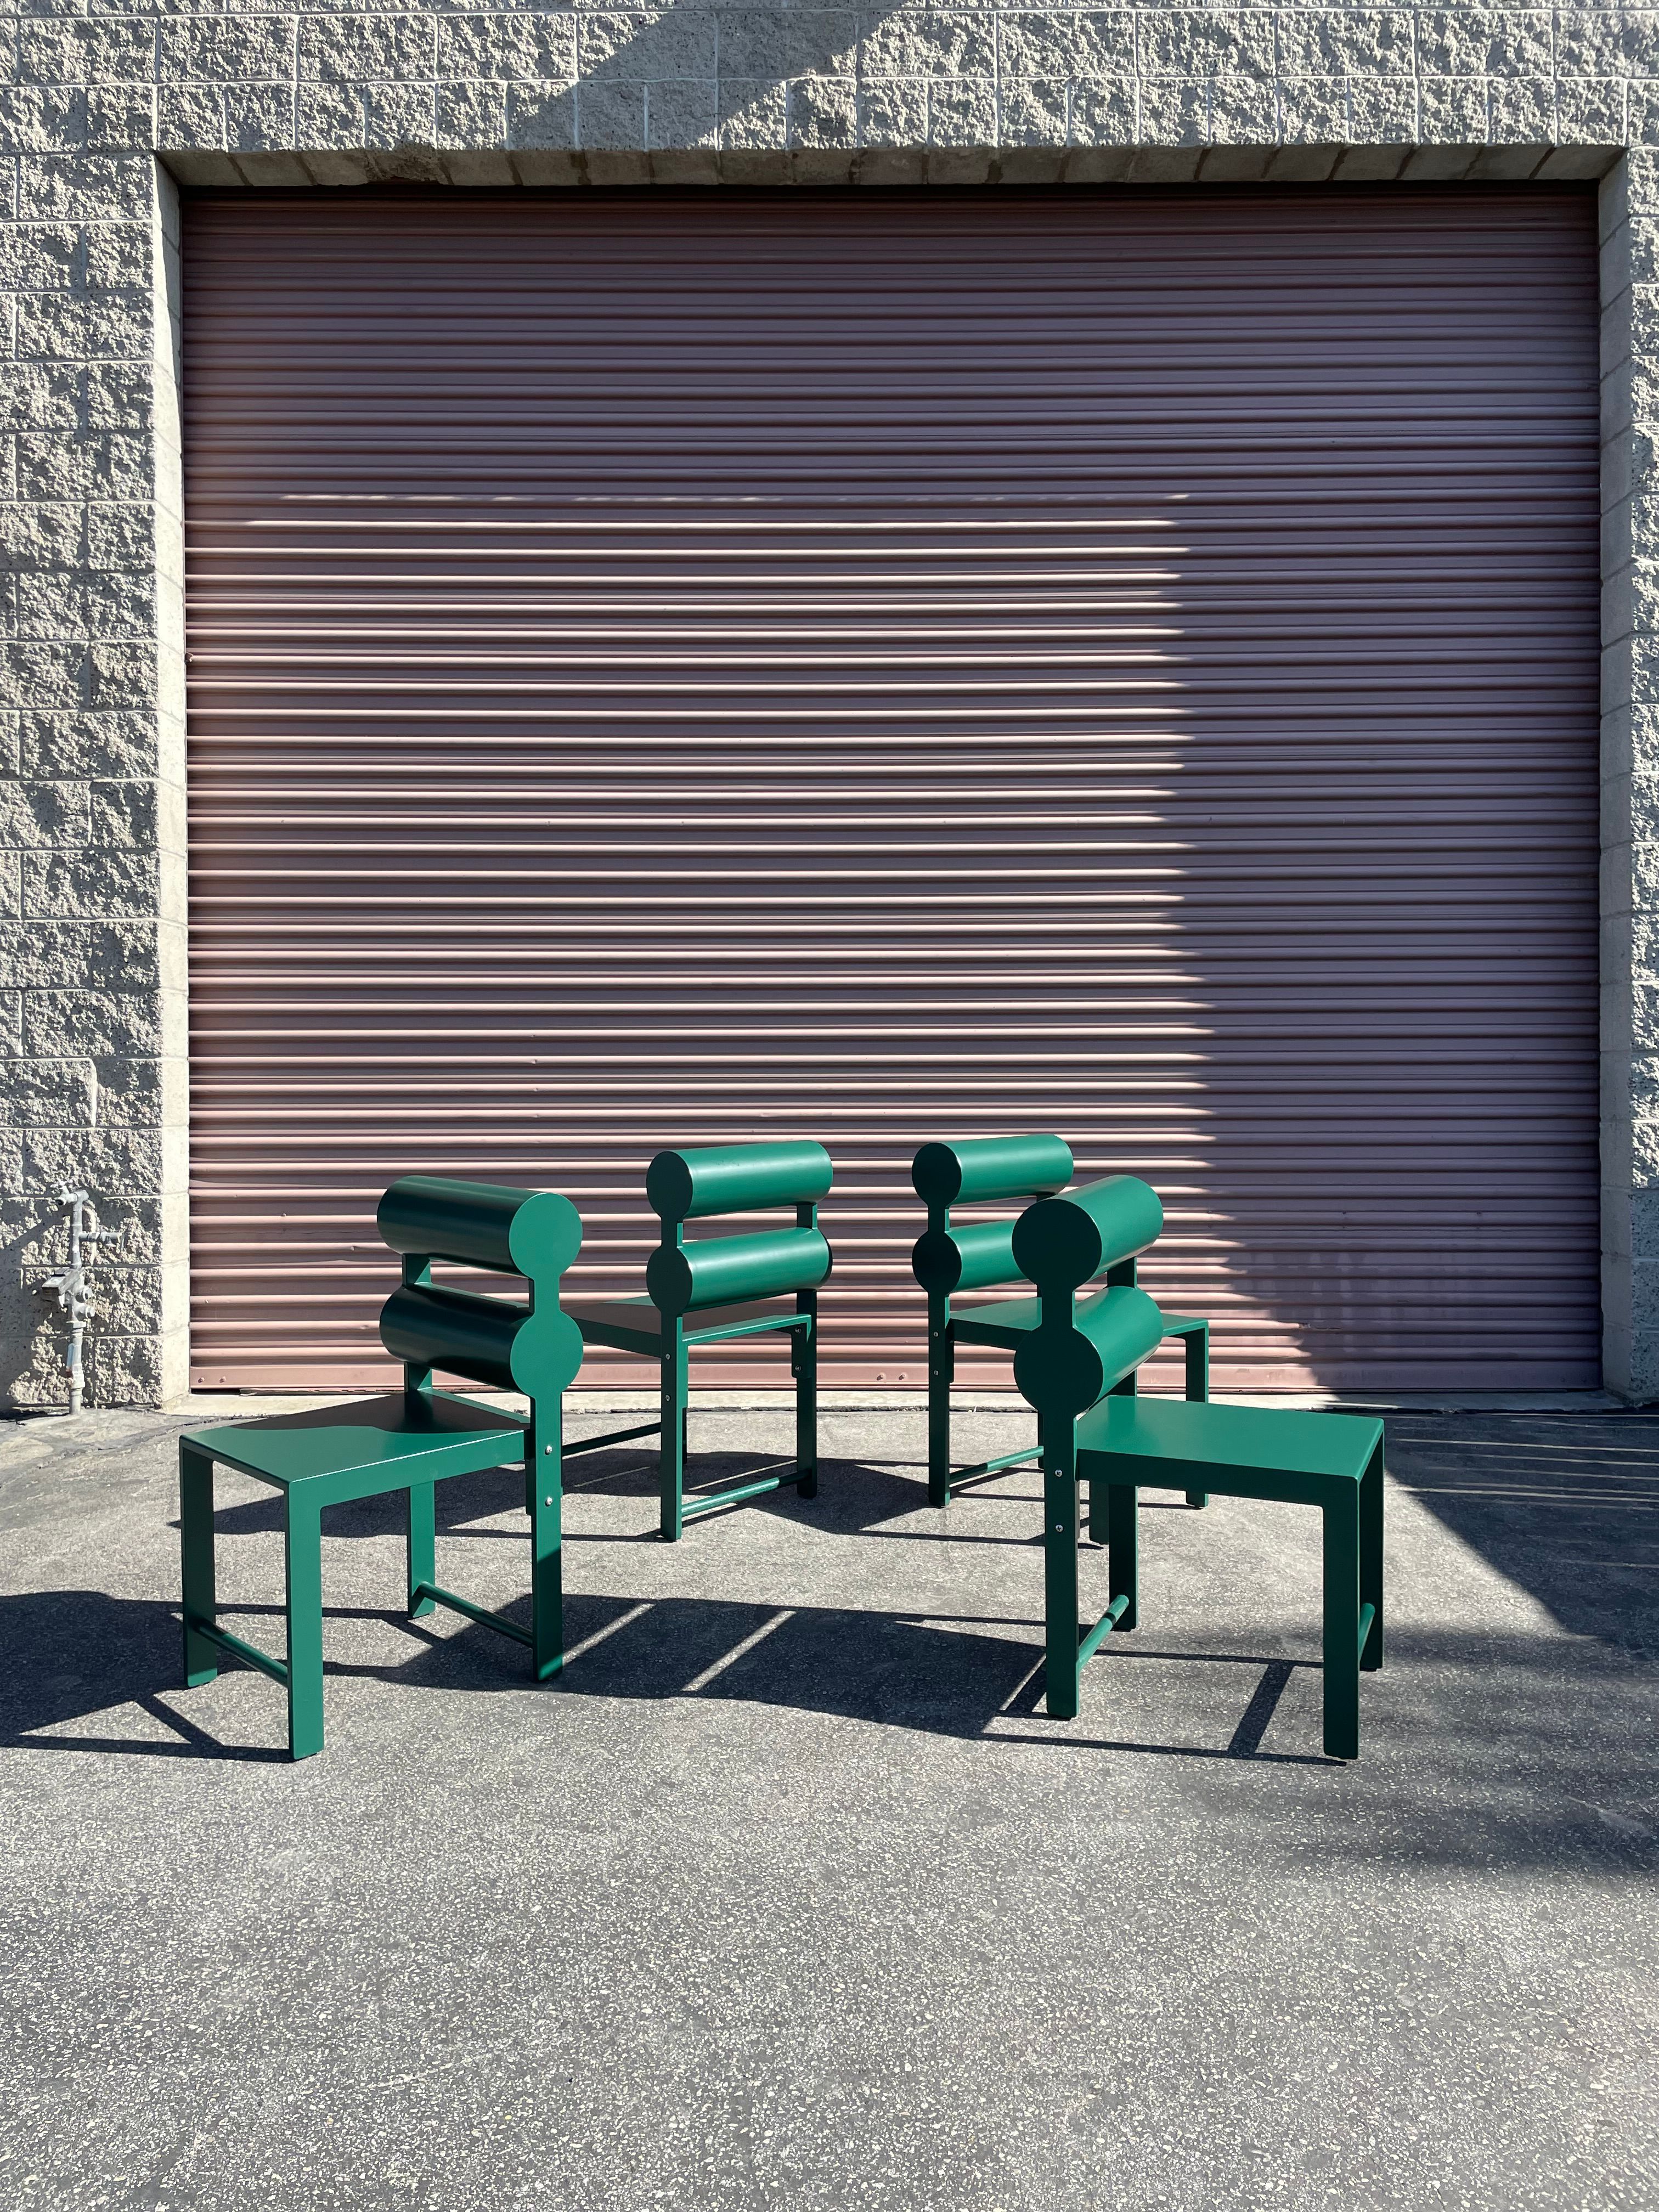  Set of Green Double Cylinder Back Chairs - Folklor LA product image 3